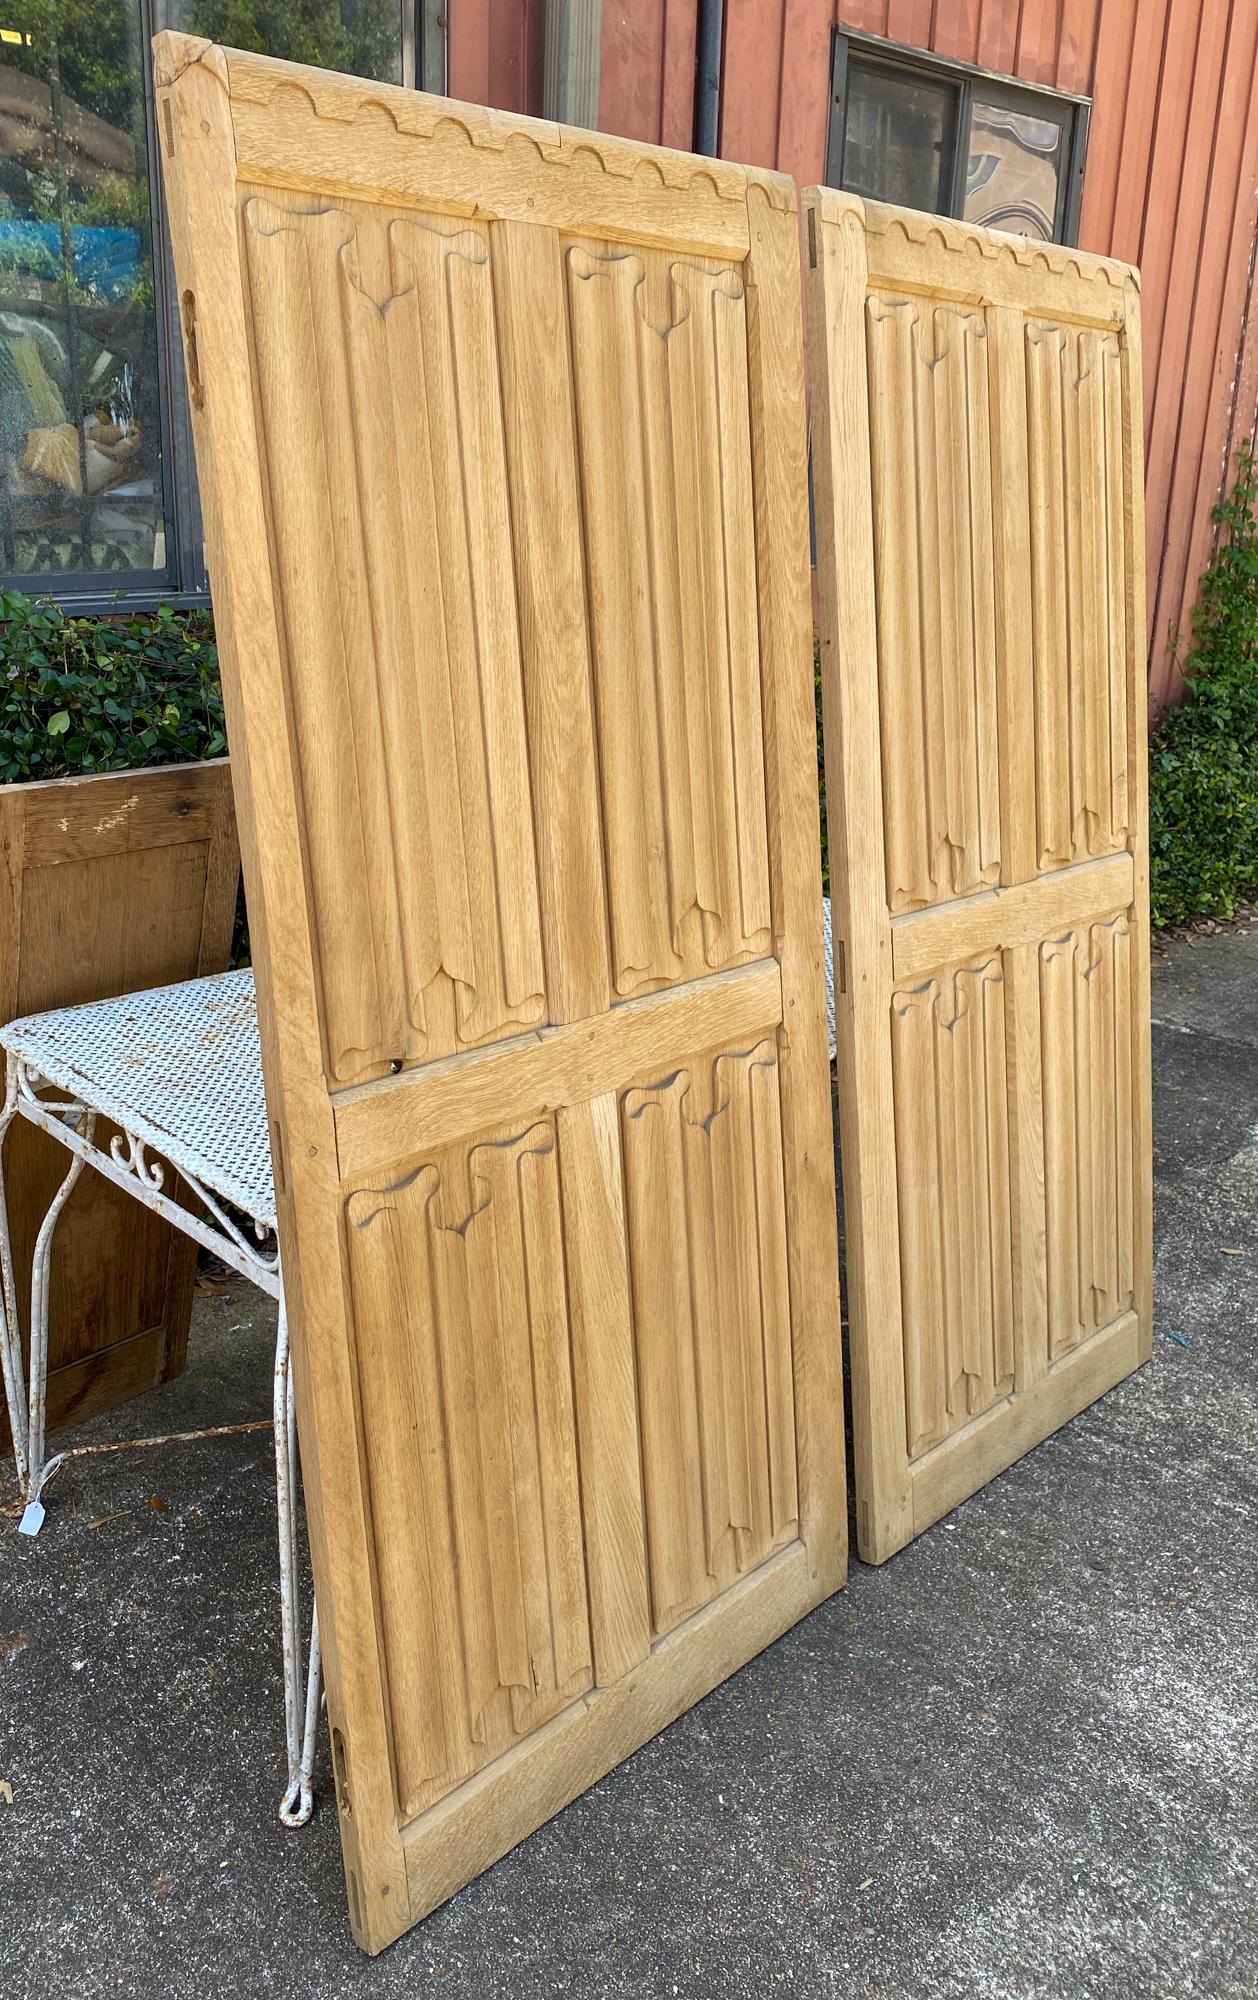 This is a set of four oak panels with beautifully delicate hand carved details that mimic folded fabric or paper. Sourced in England, two larger panels and two smaller ones make the set. These could be made into a room divider or installed as